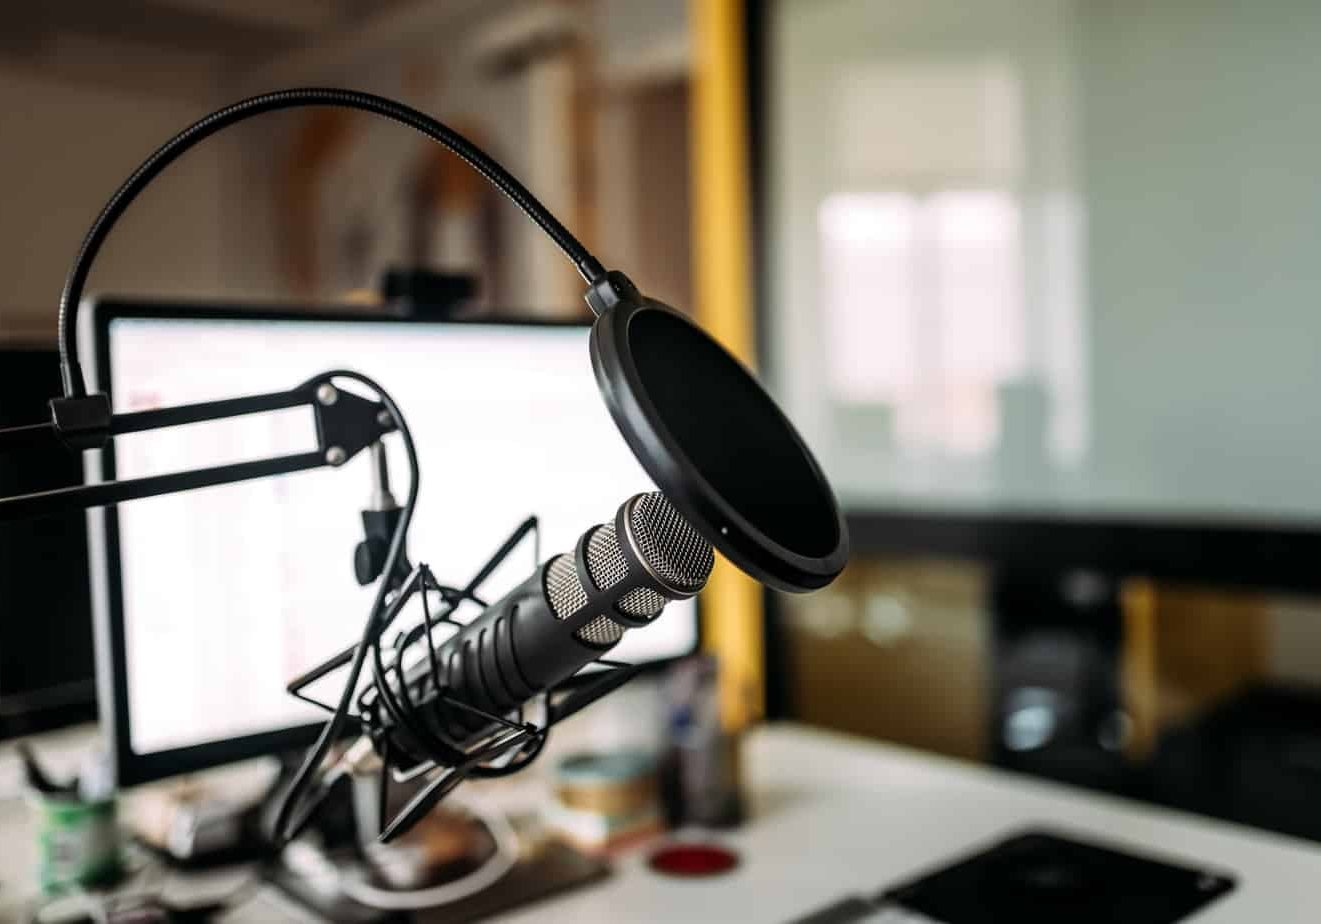 Podcast studio: microphone and computer.